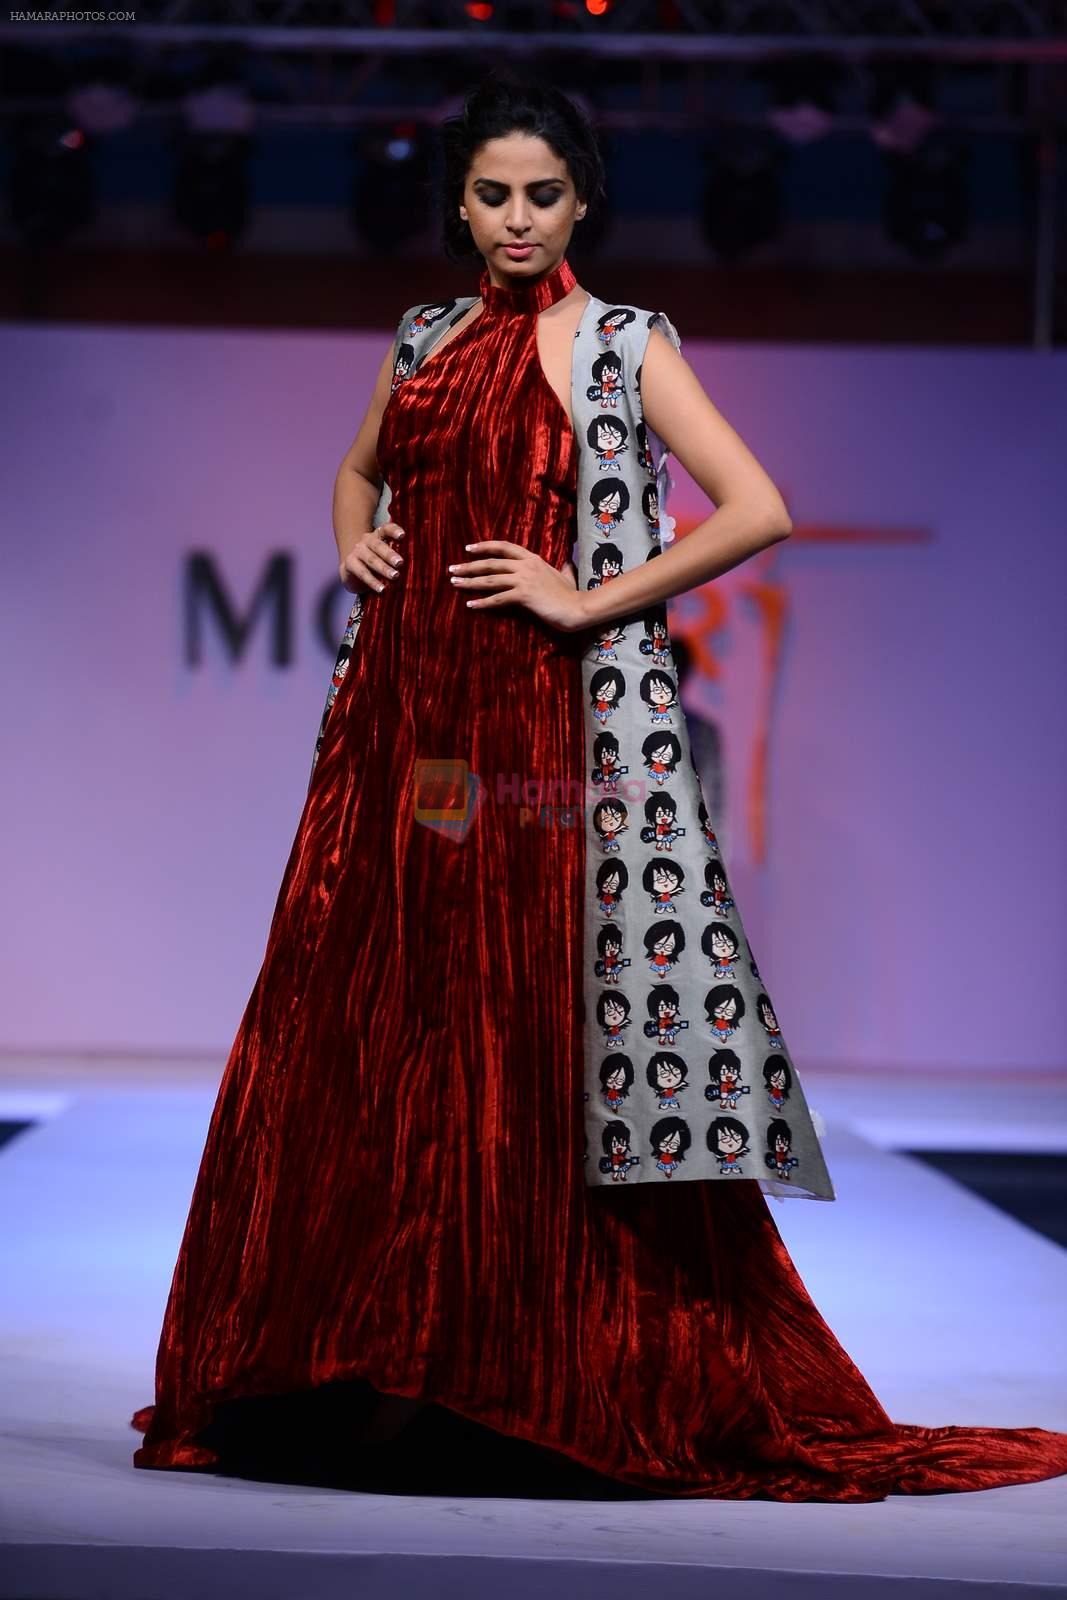 Model walk the ramp for Modart fashion show and Lingerie show on 5th may 2015